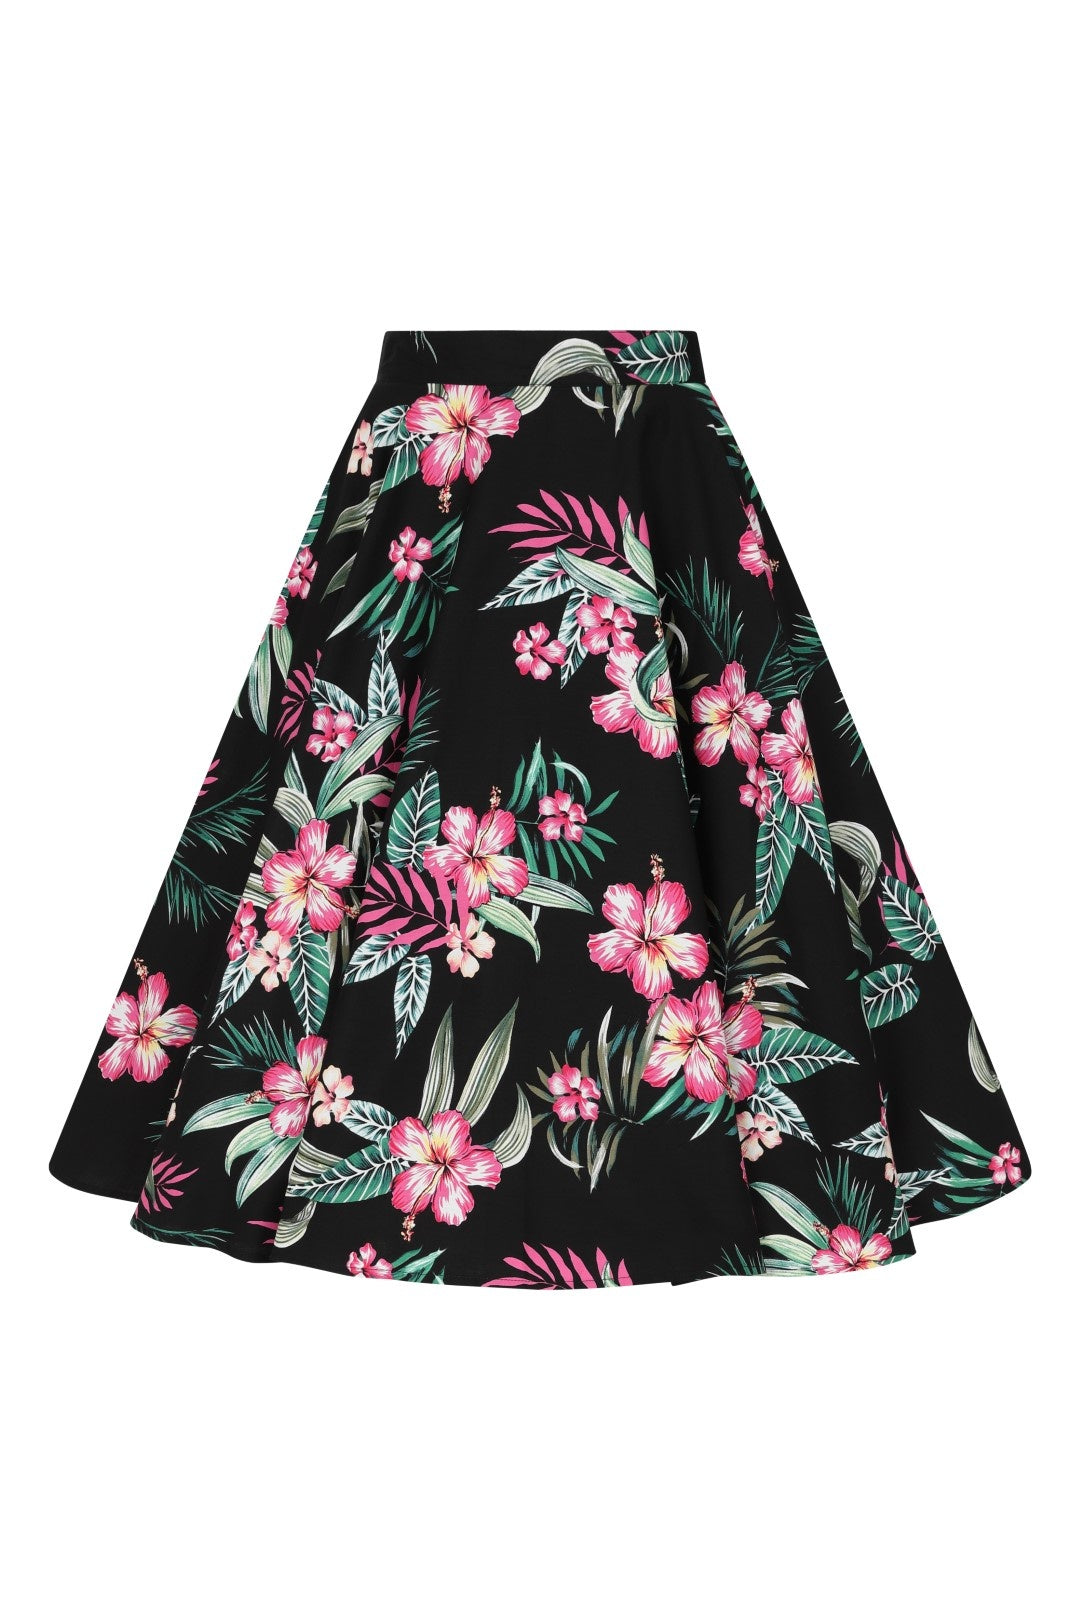 50s style black skirt with pink hibiscus flowers and green foliage print